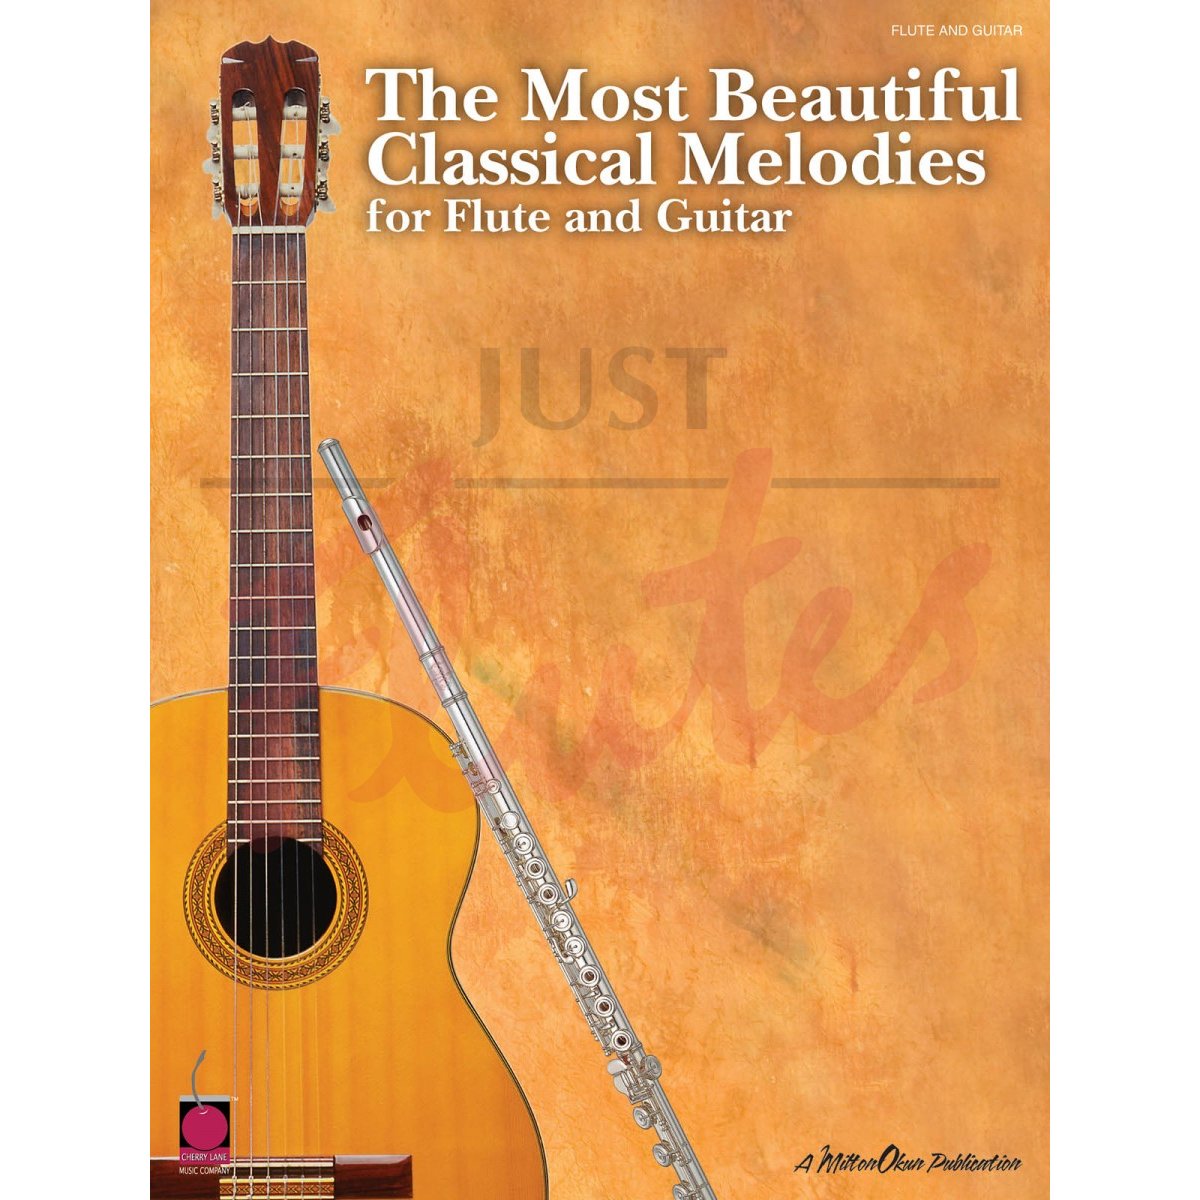 The Most Beautiful Classical Melodies for Flute and Guitar